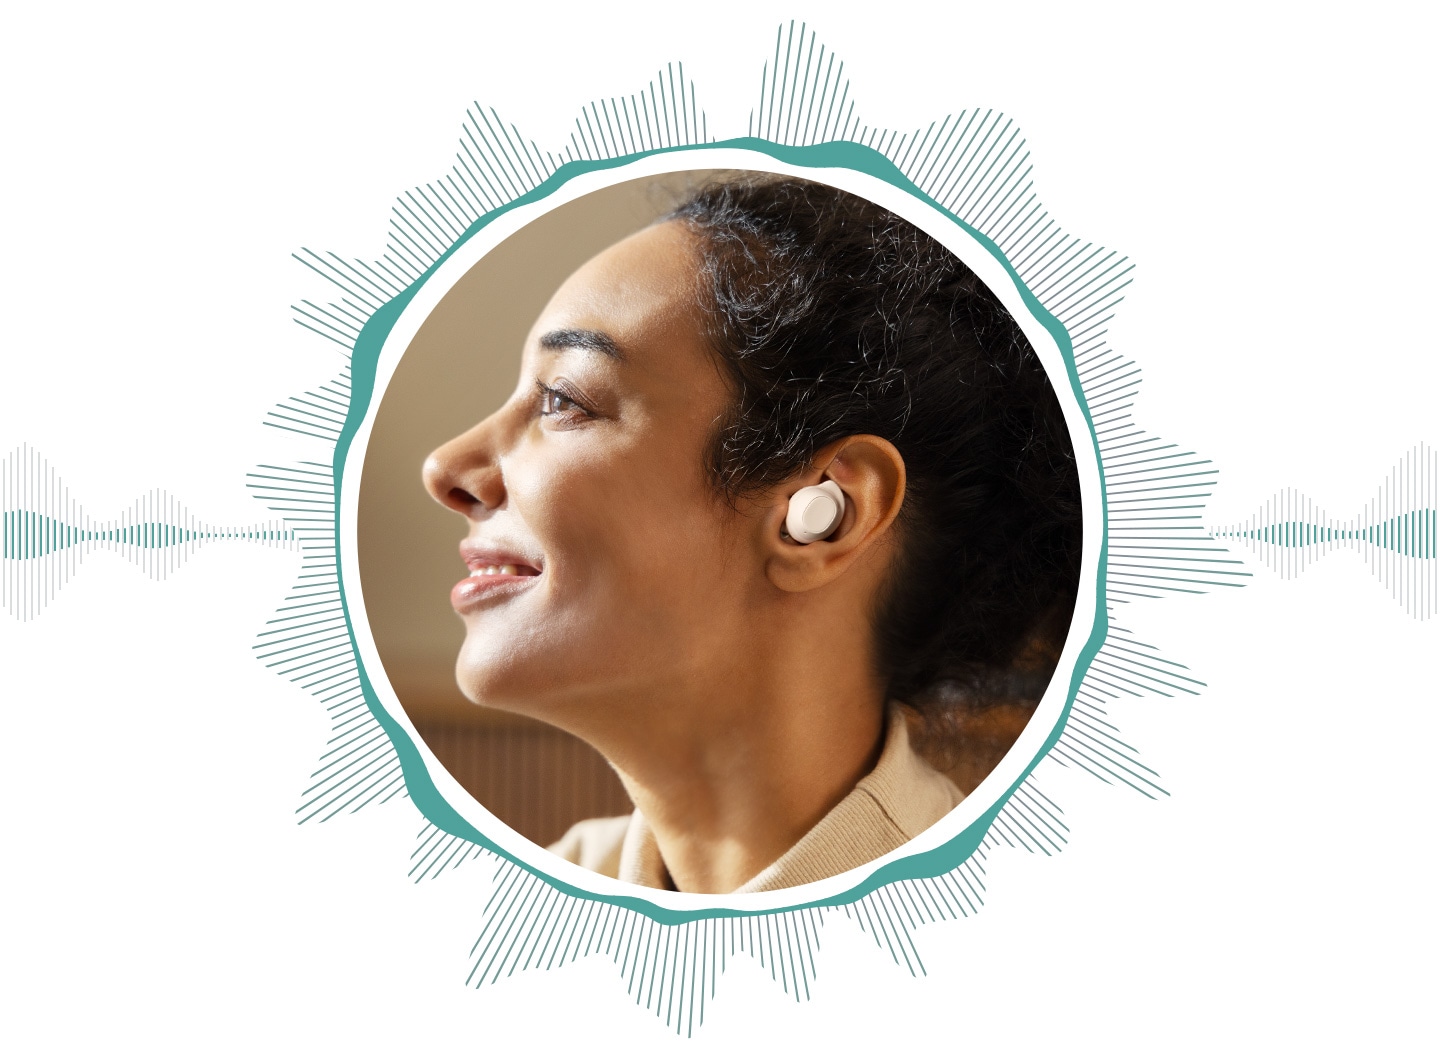 A woman wearing a Galaxy Buds FE in her left ear. Her face is enclosed within a circle of wavelike lines, symbolizing the active noise canceling feature of the earbuds.